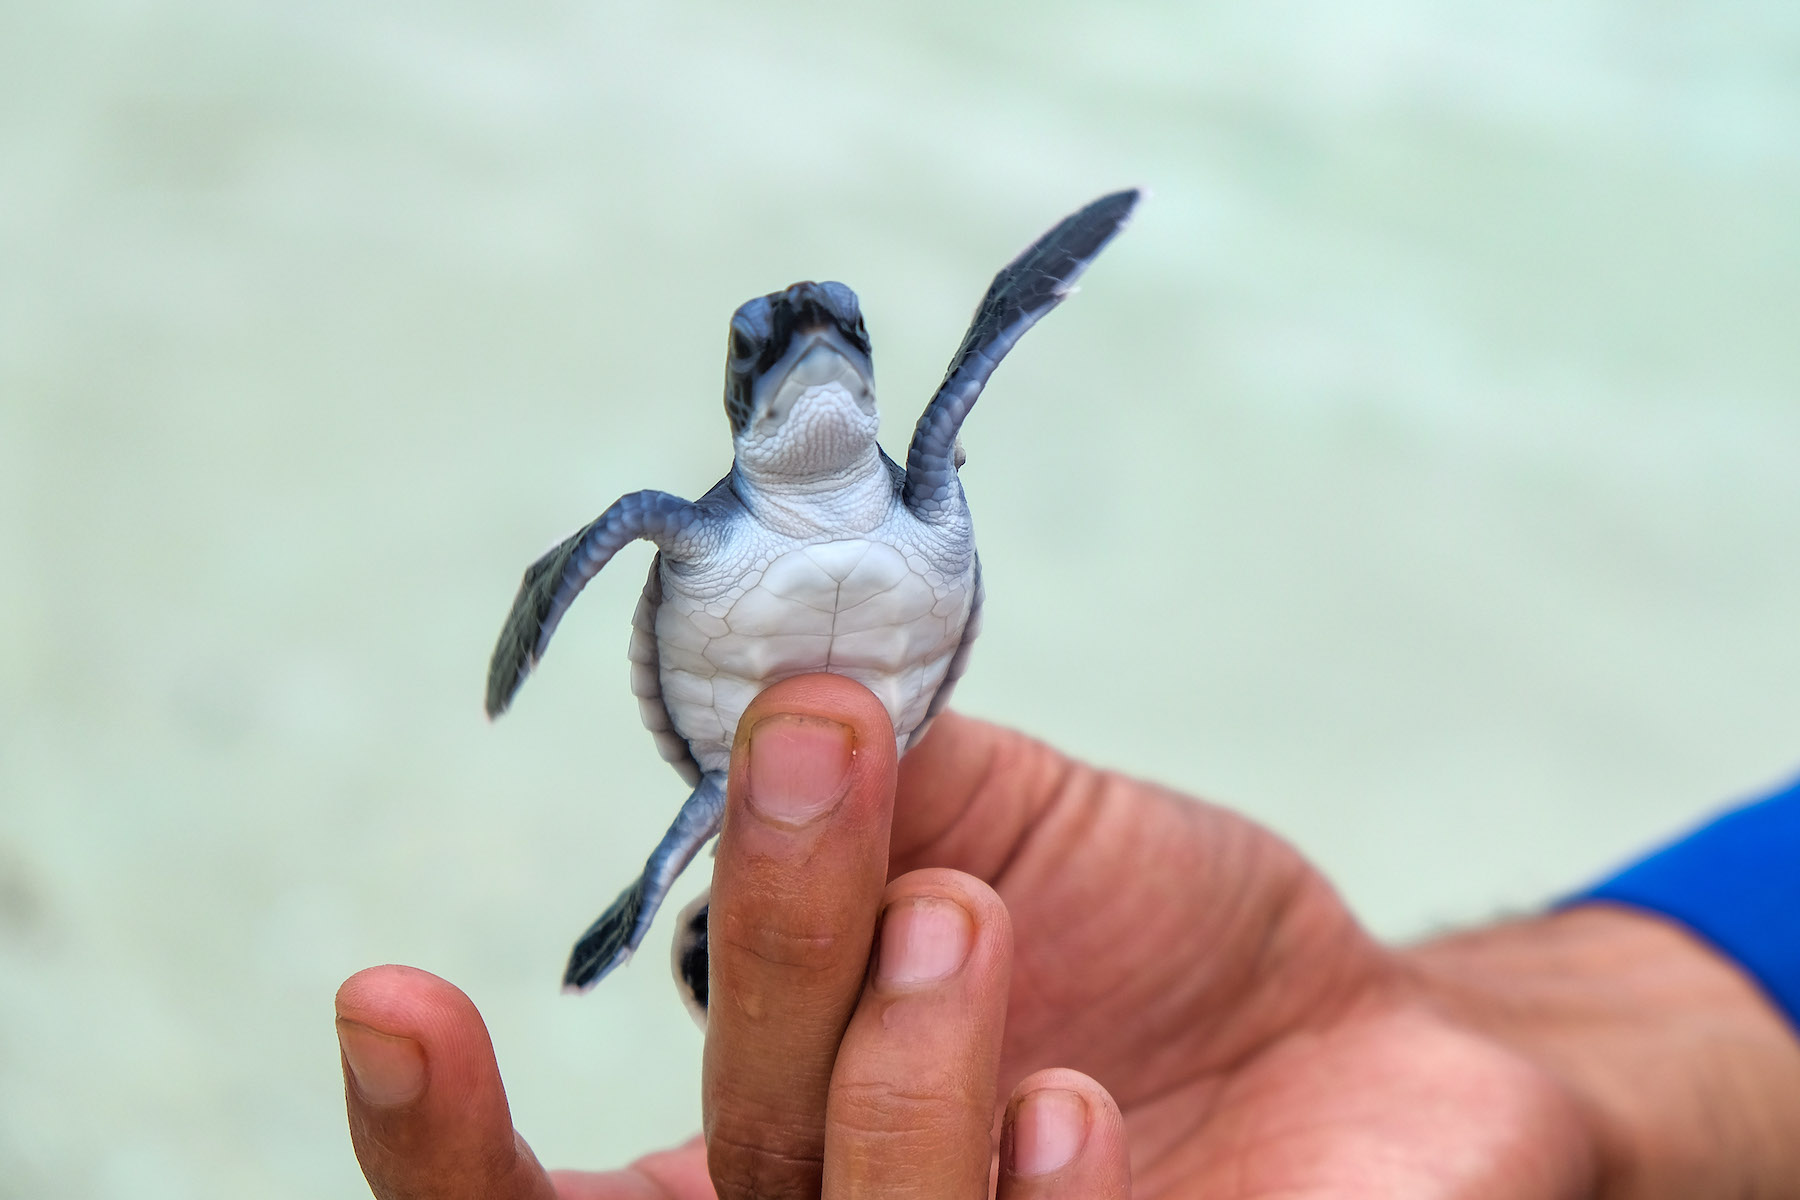 305 Baby Sea Turtles Have Been Released To Sea In Indonesia After Being Rescued From Poachers